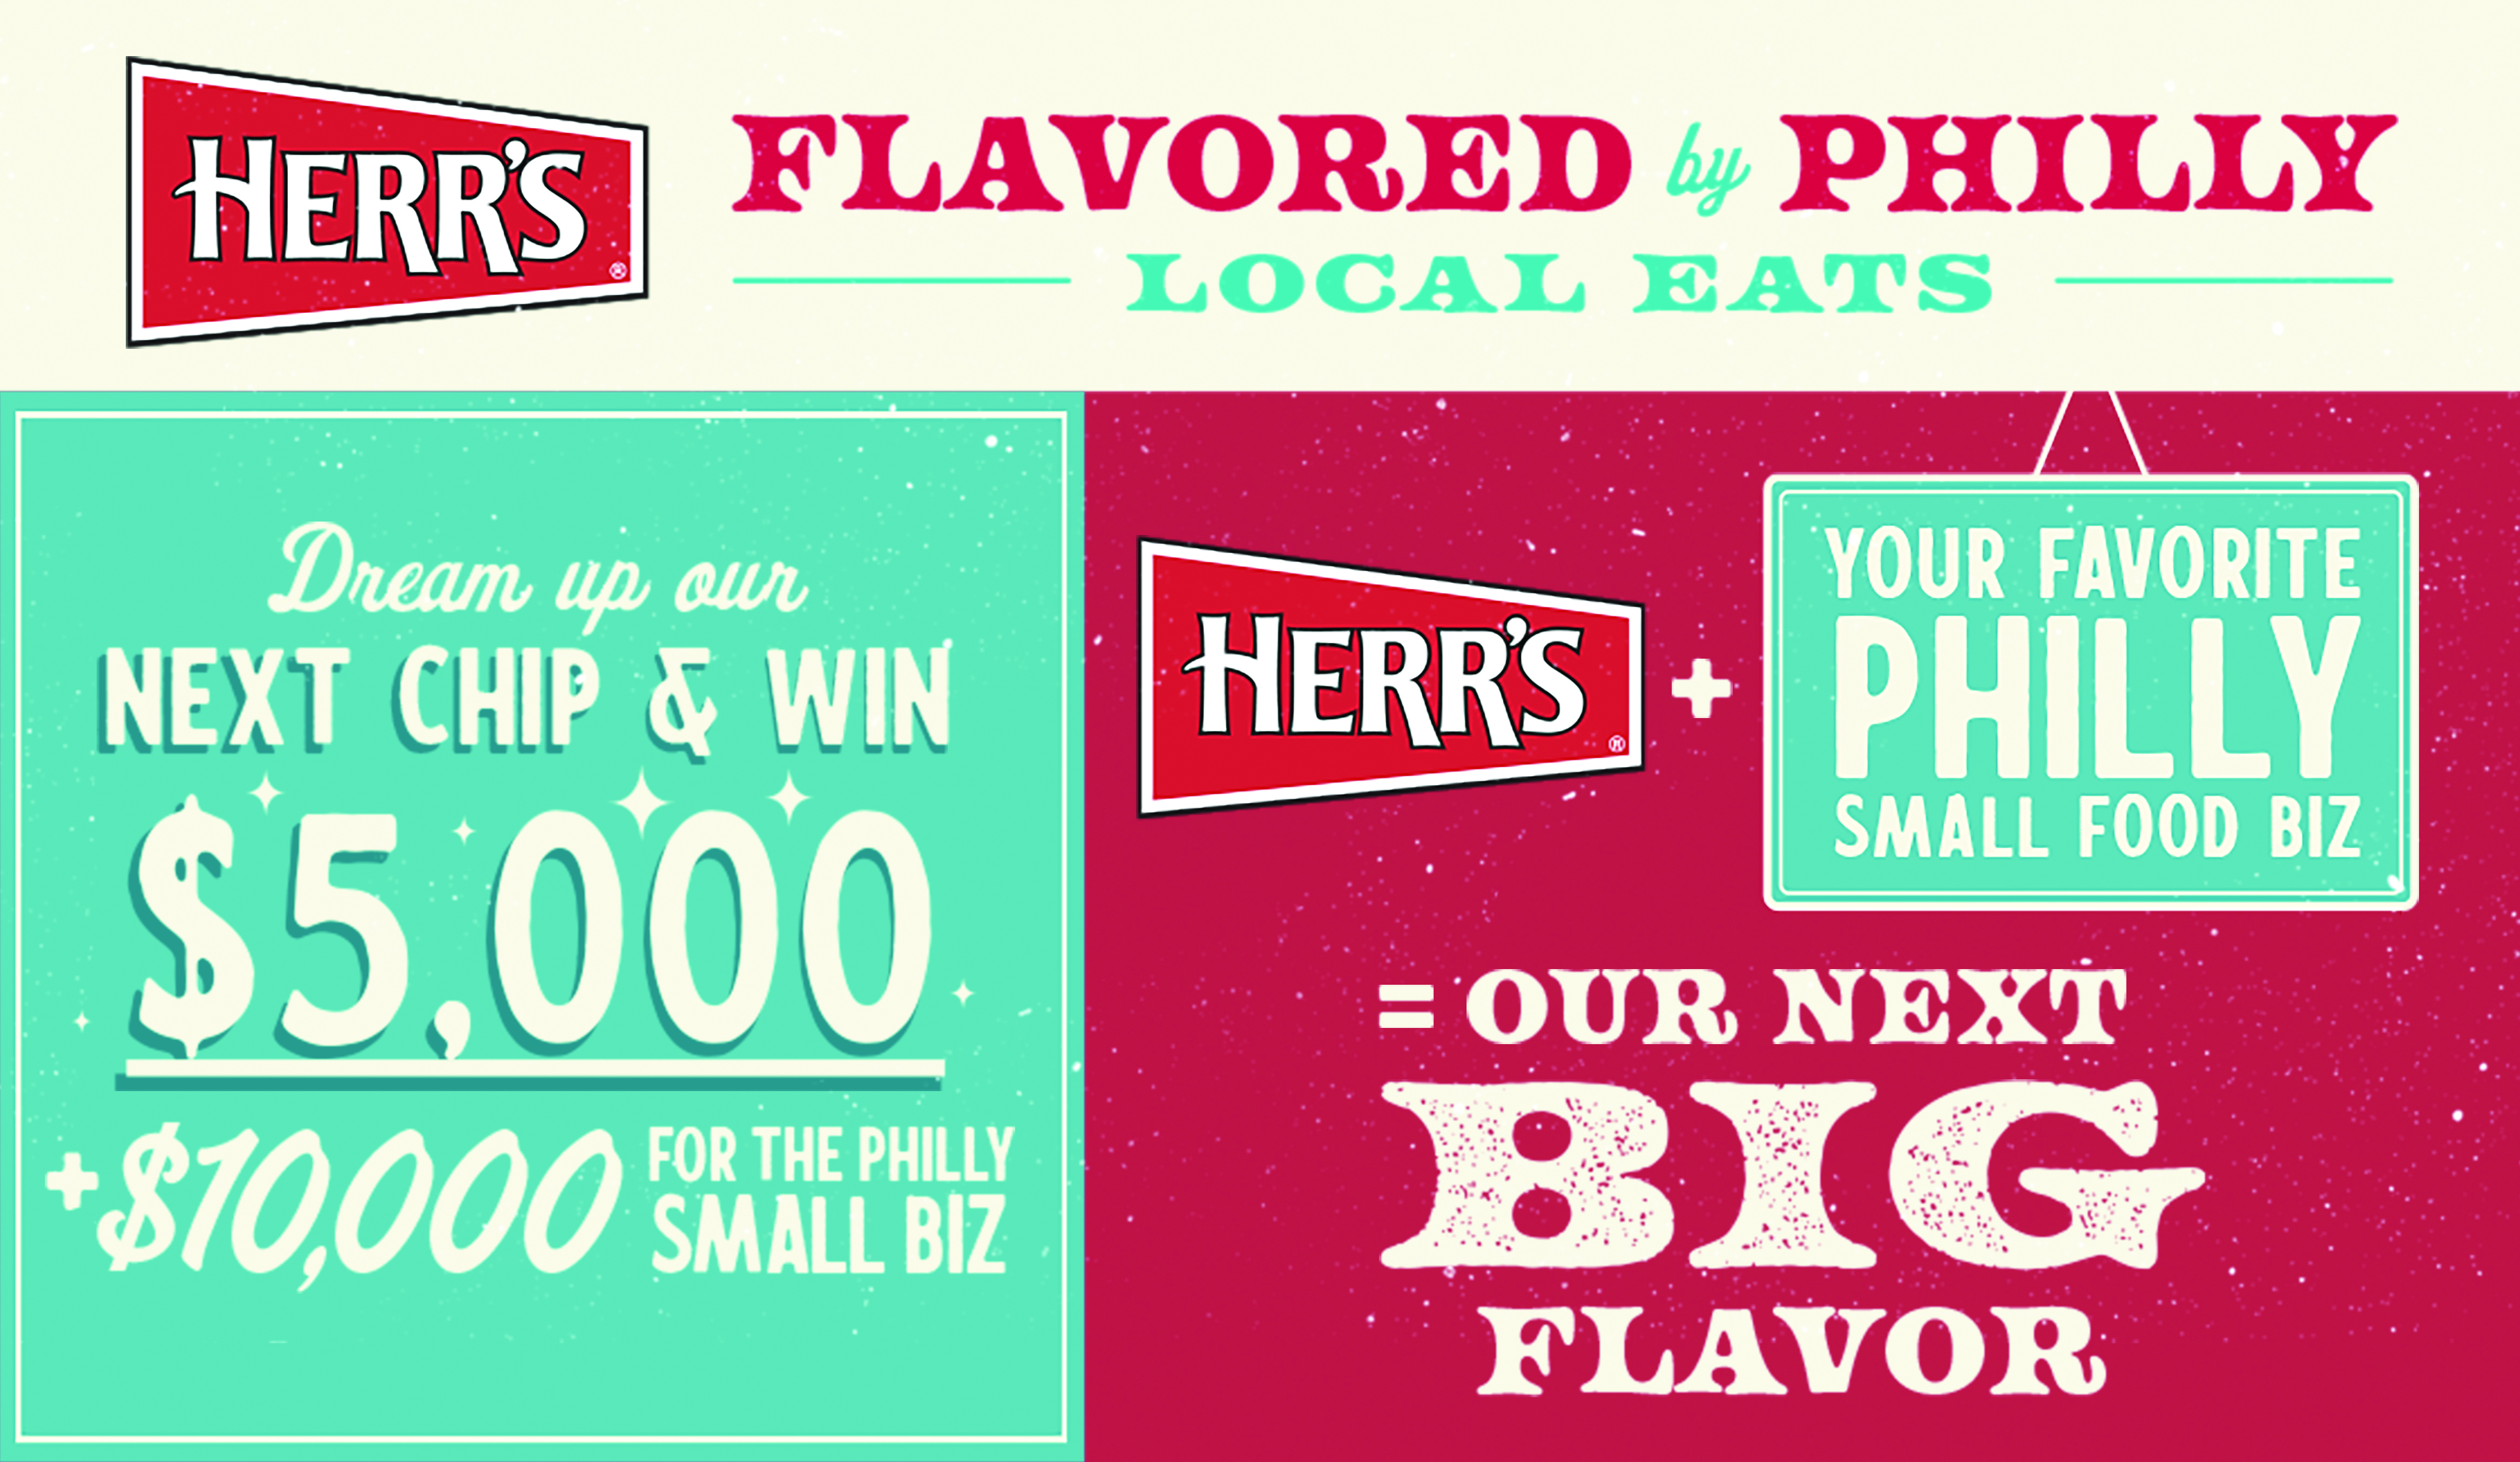 Herr's Flavored by Philly Local Eats